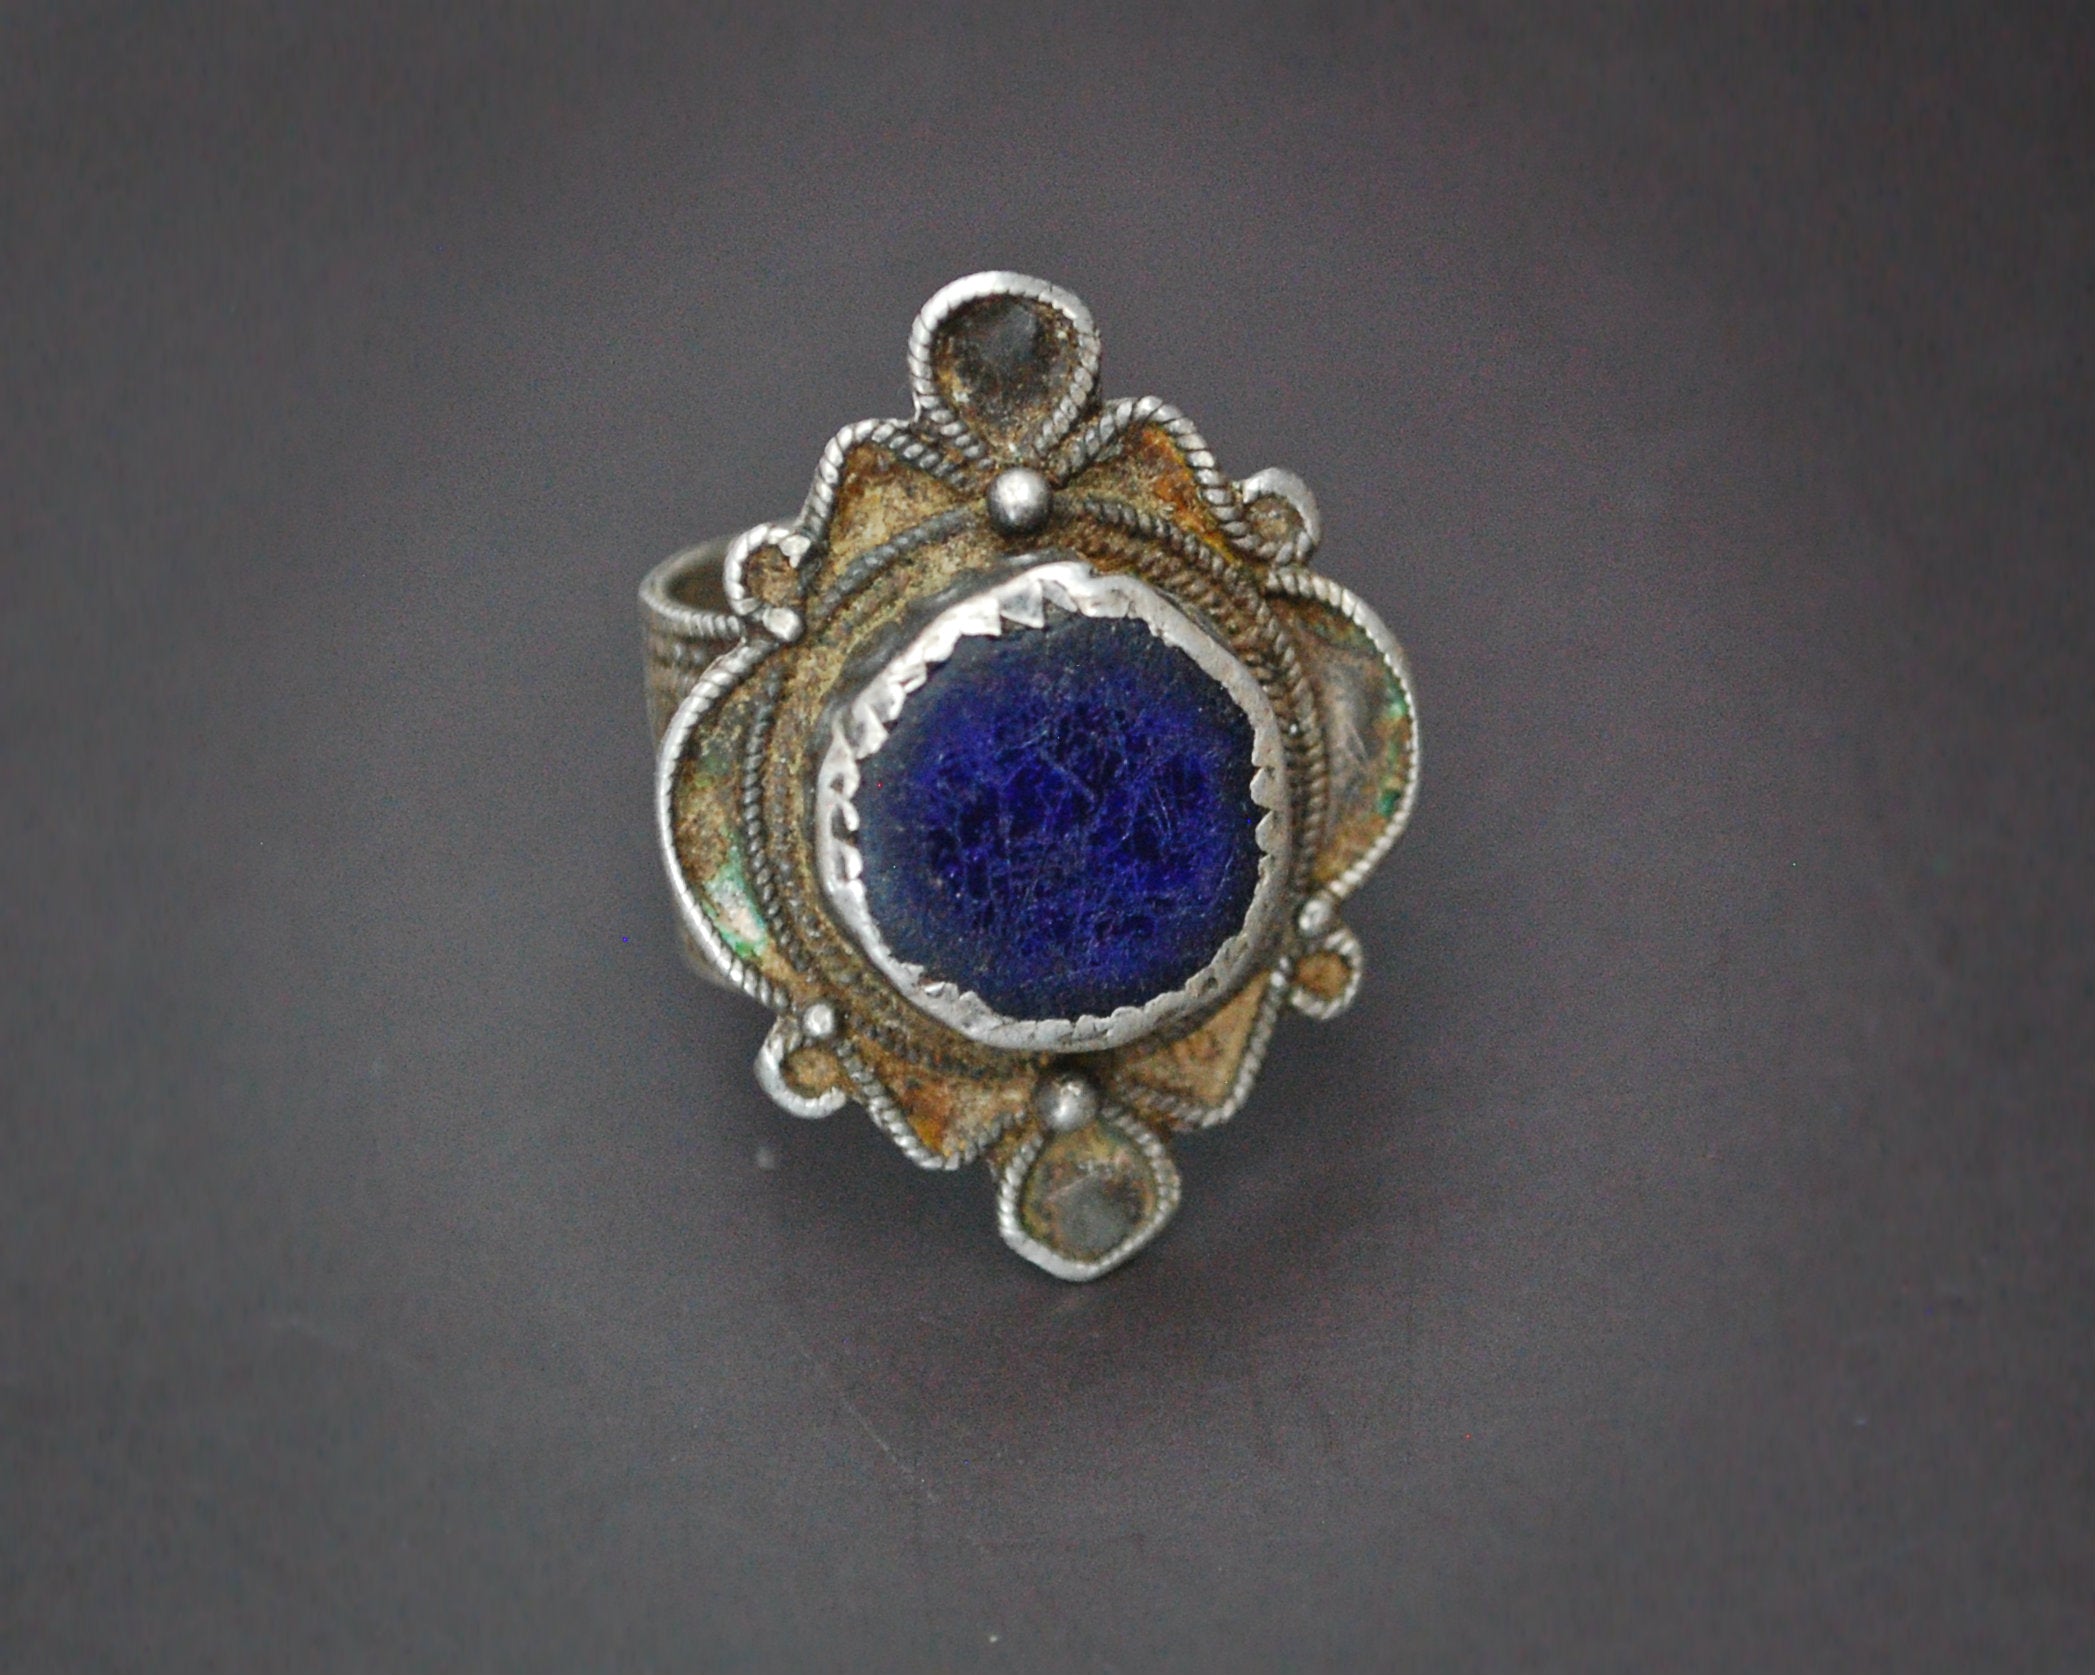 Berber Ring with Blue Stone - Size 8.5